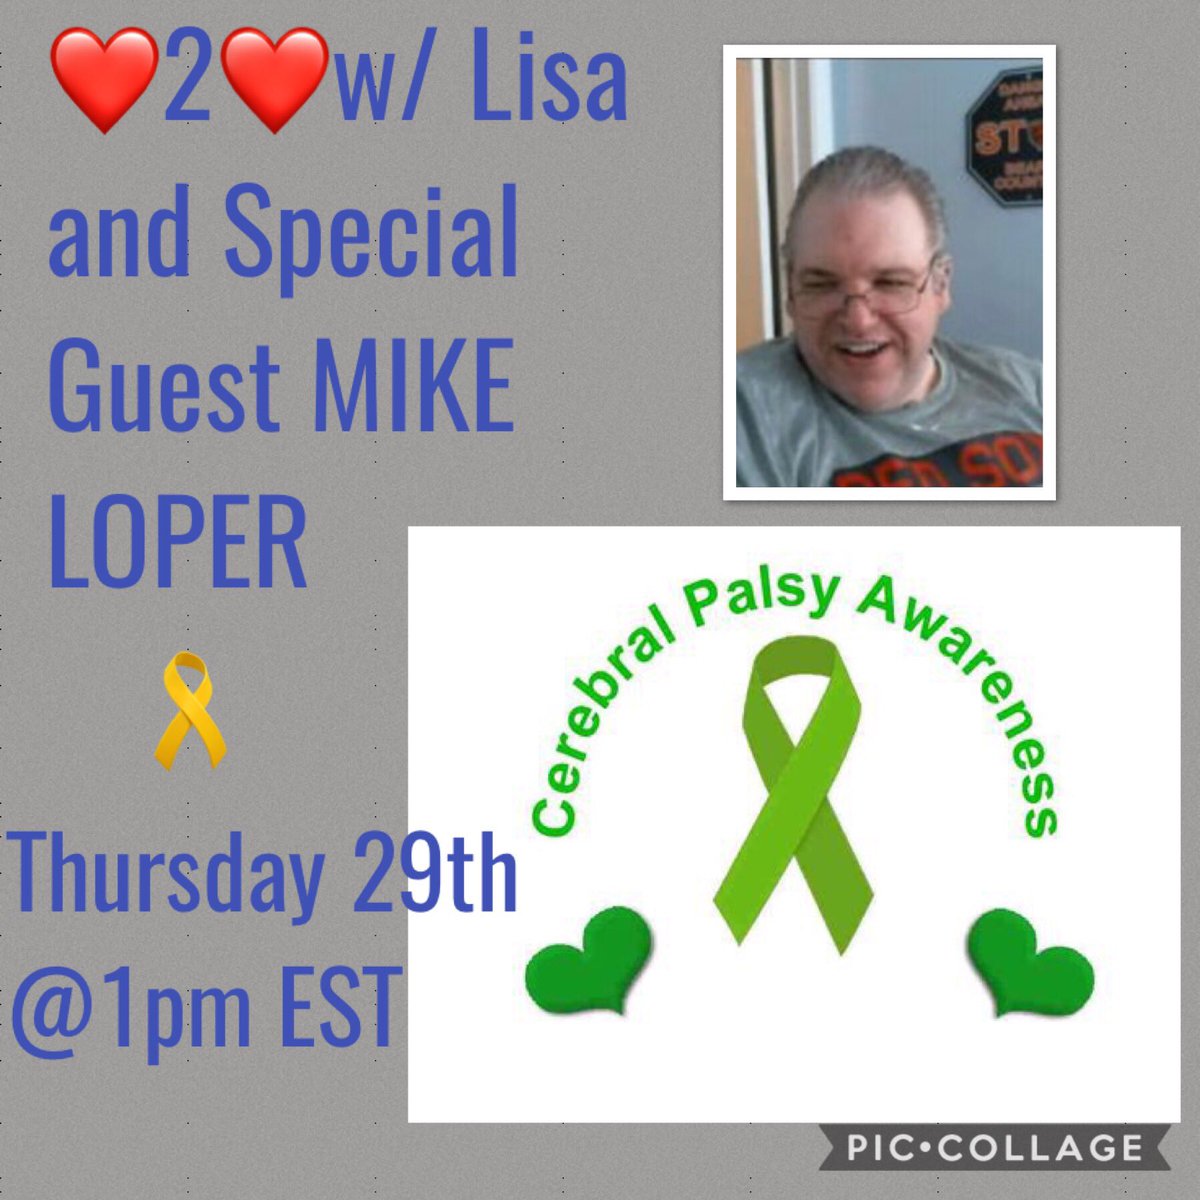 🎗PLEASE JOIN @mikeloper ON MY SHOW ❤️2❤️w/ Lisa @1pm Thursday 29th on @YouNow to hear his story on living with #CerebralPalsy and how he #ConquersLife  in the most positive way he knows